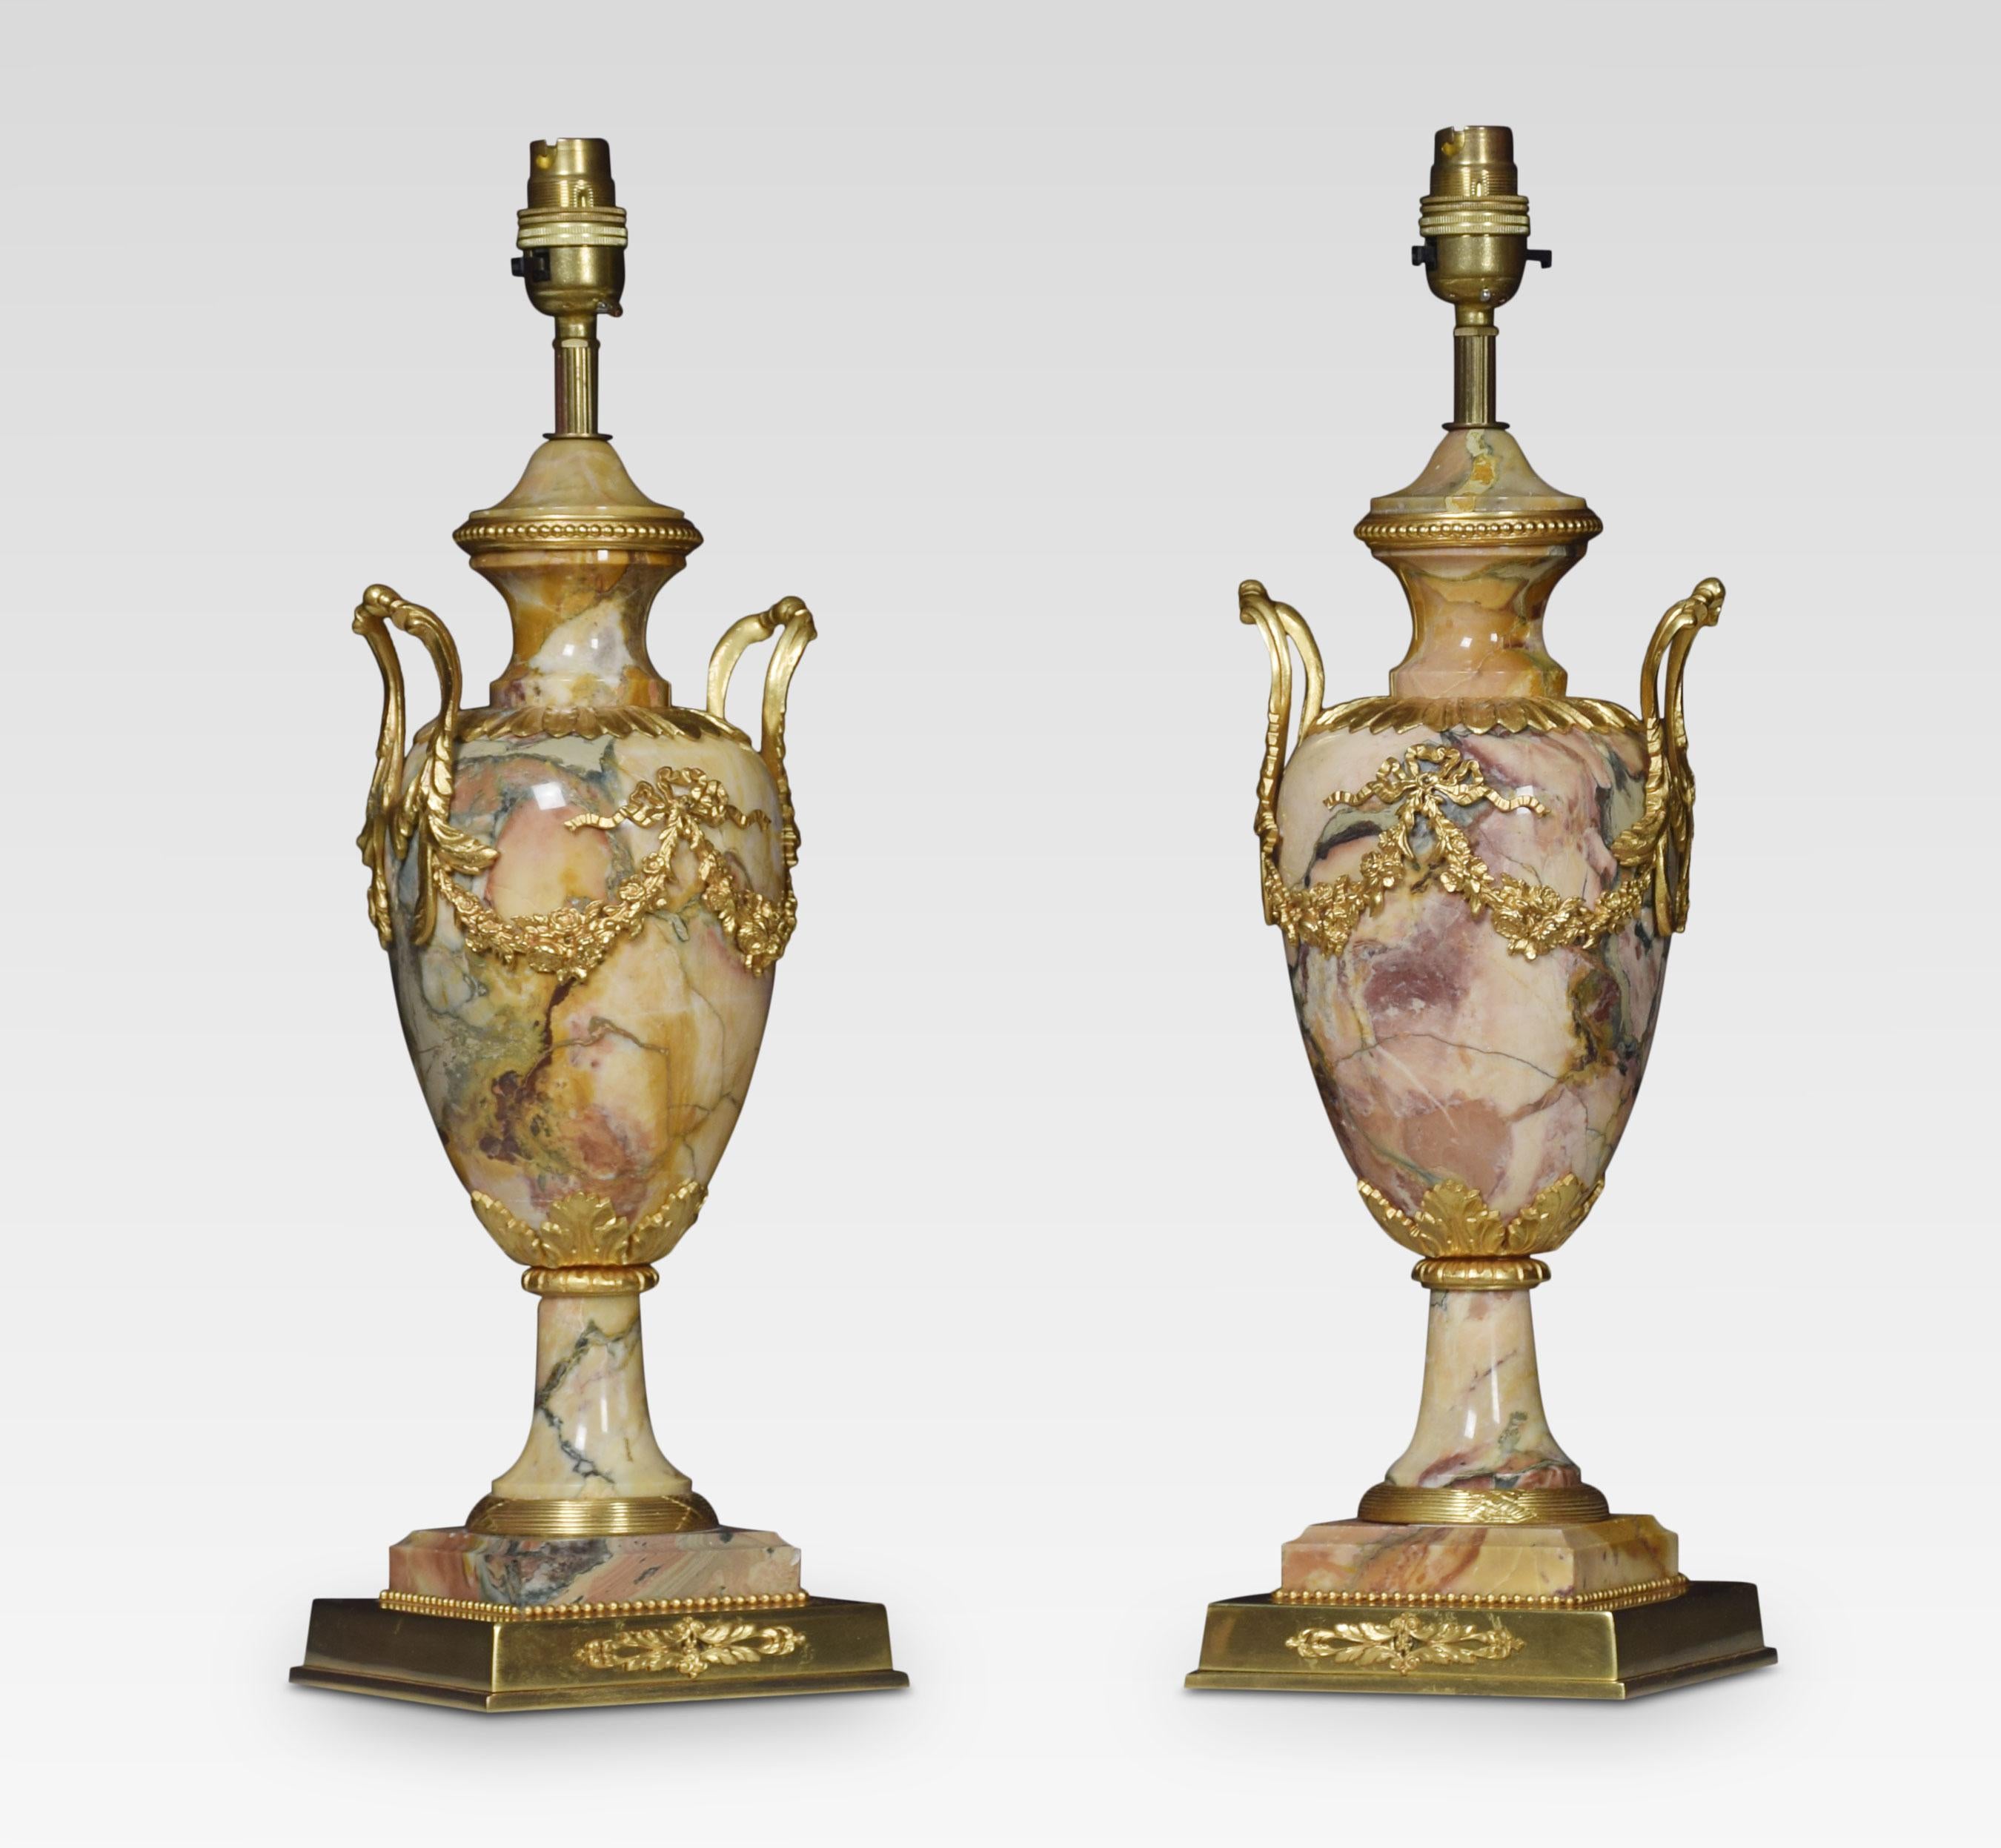 Pair of gilt brass and marble twin handle urn form table lamps, with ribbon tie and swag decoration. All raised up on square stepped bases. Each with domed silk shades. The lamps have been rewired and tested.
Dimensions of lamps without